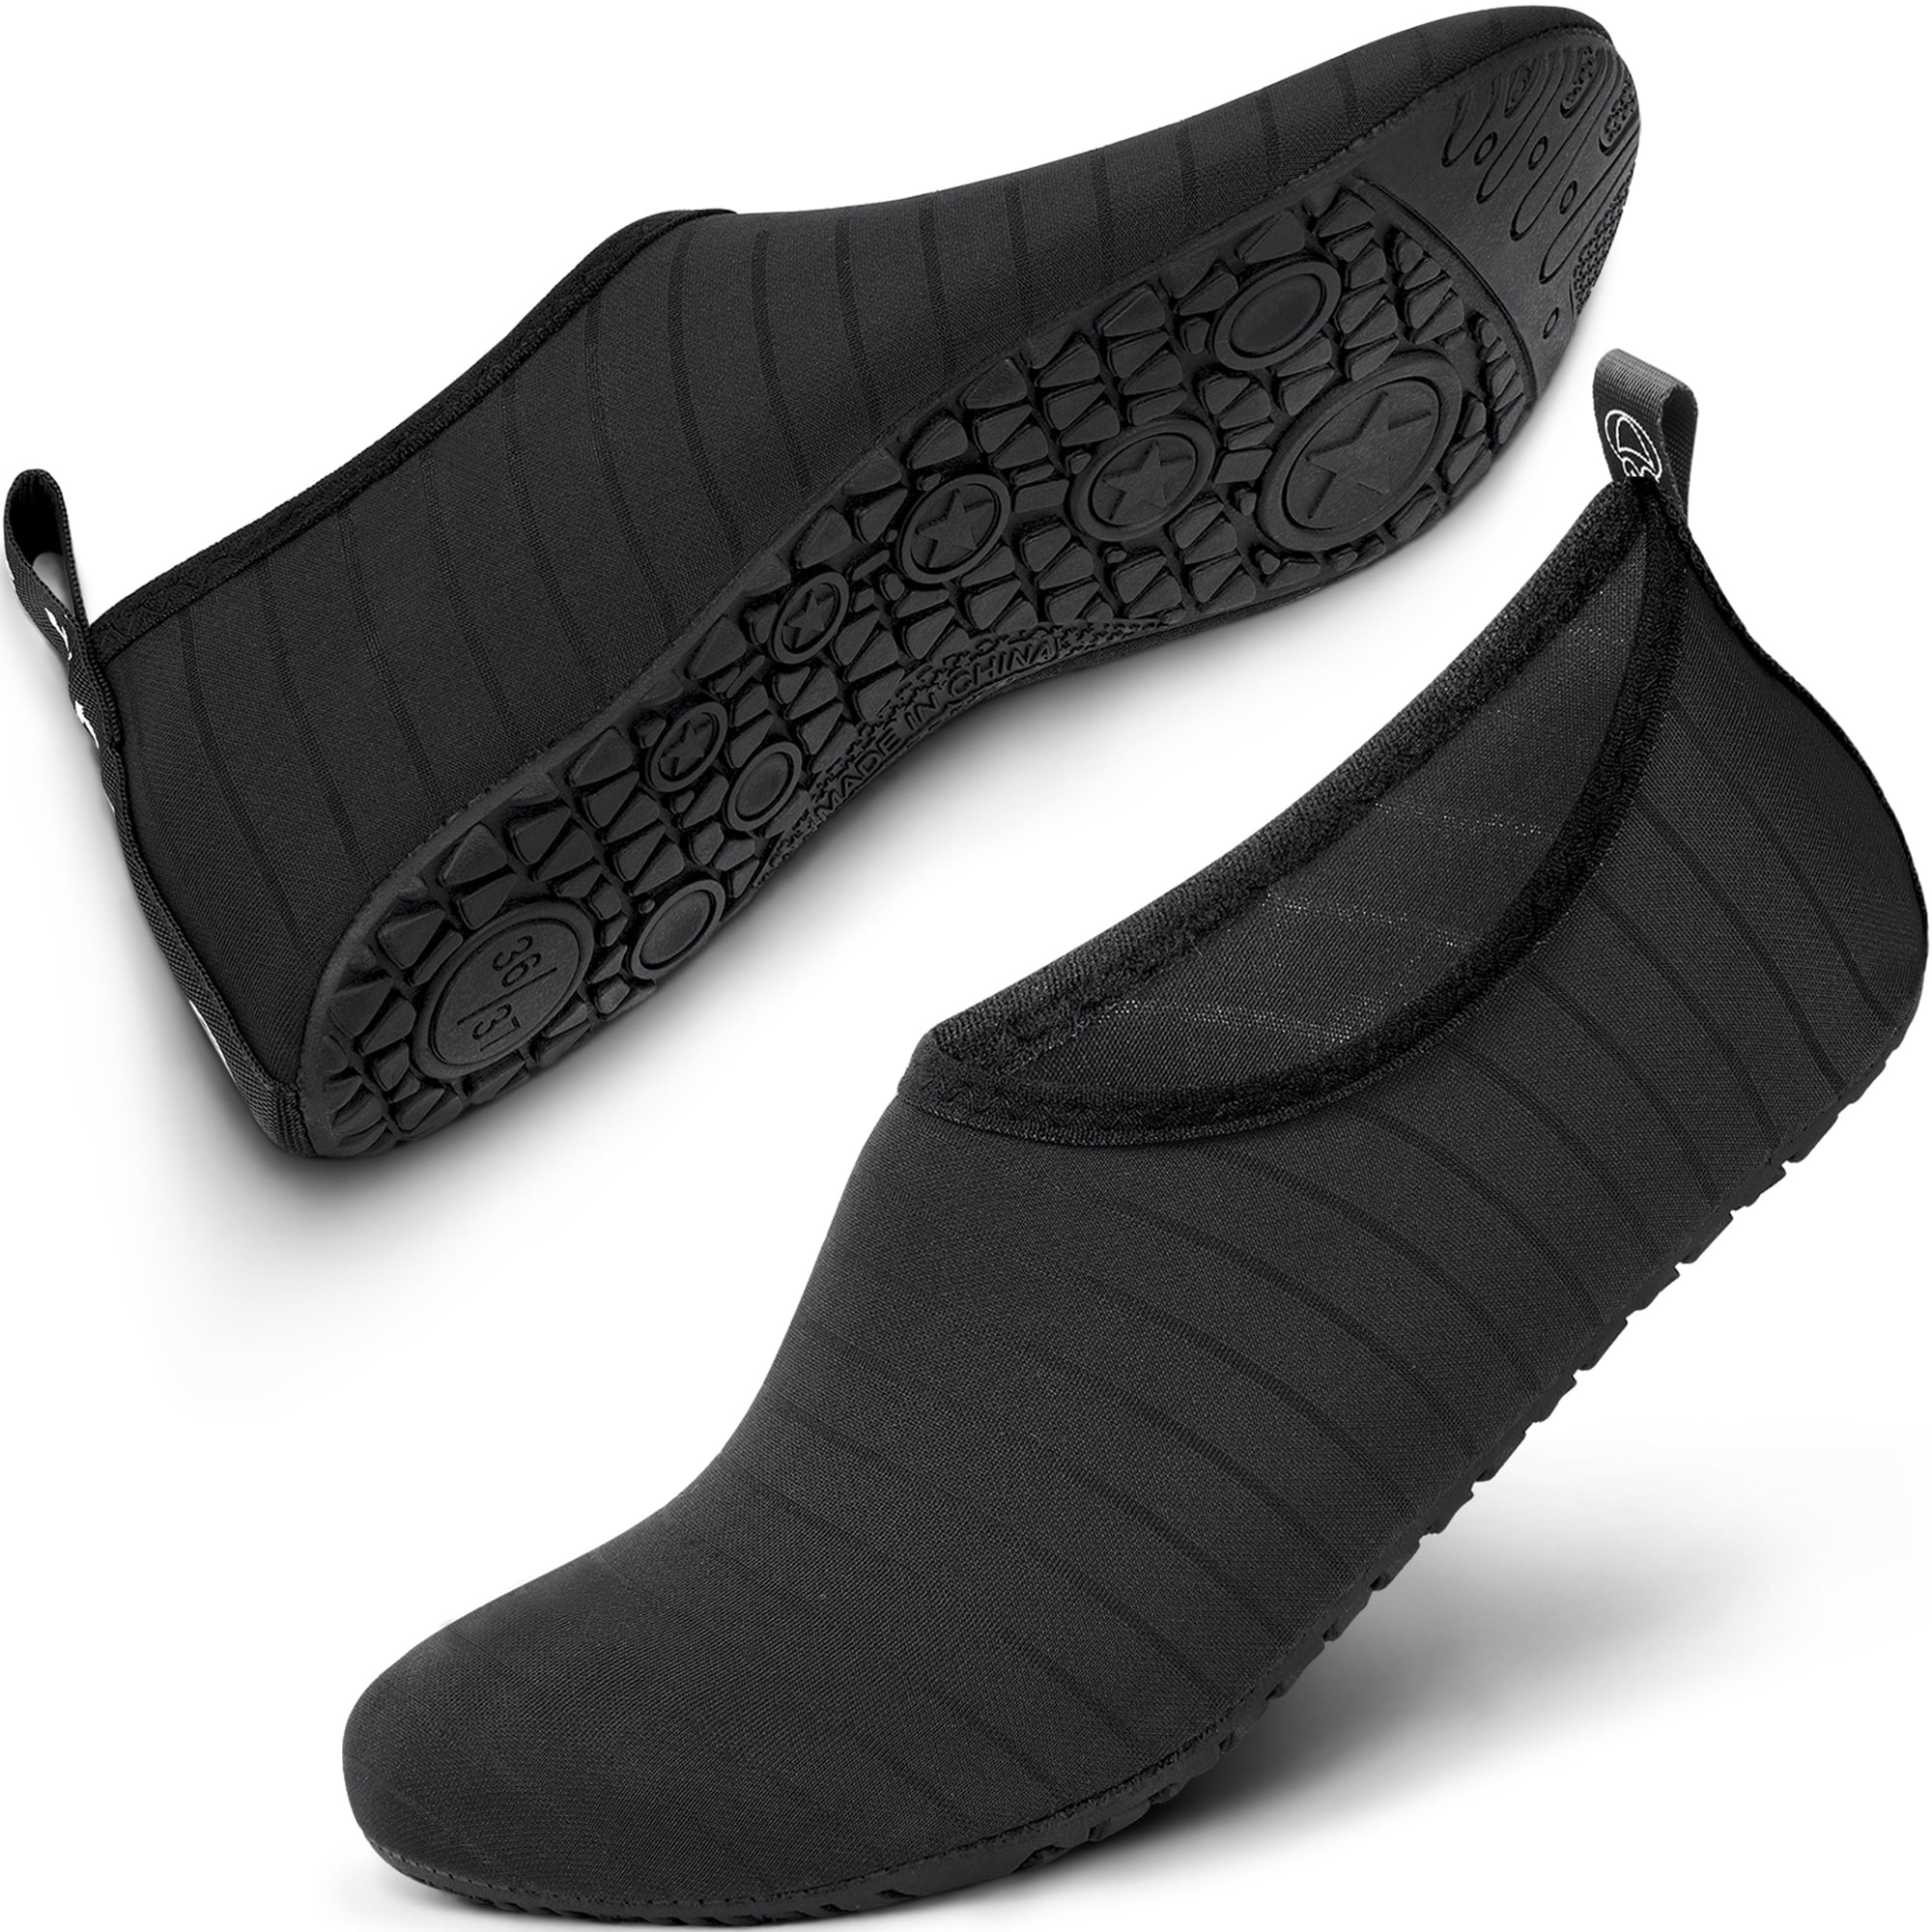 Adult Aqua Socks Outdoor Sports Water Shoes Quick Dry for Women Black 